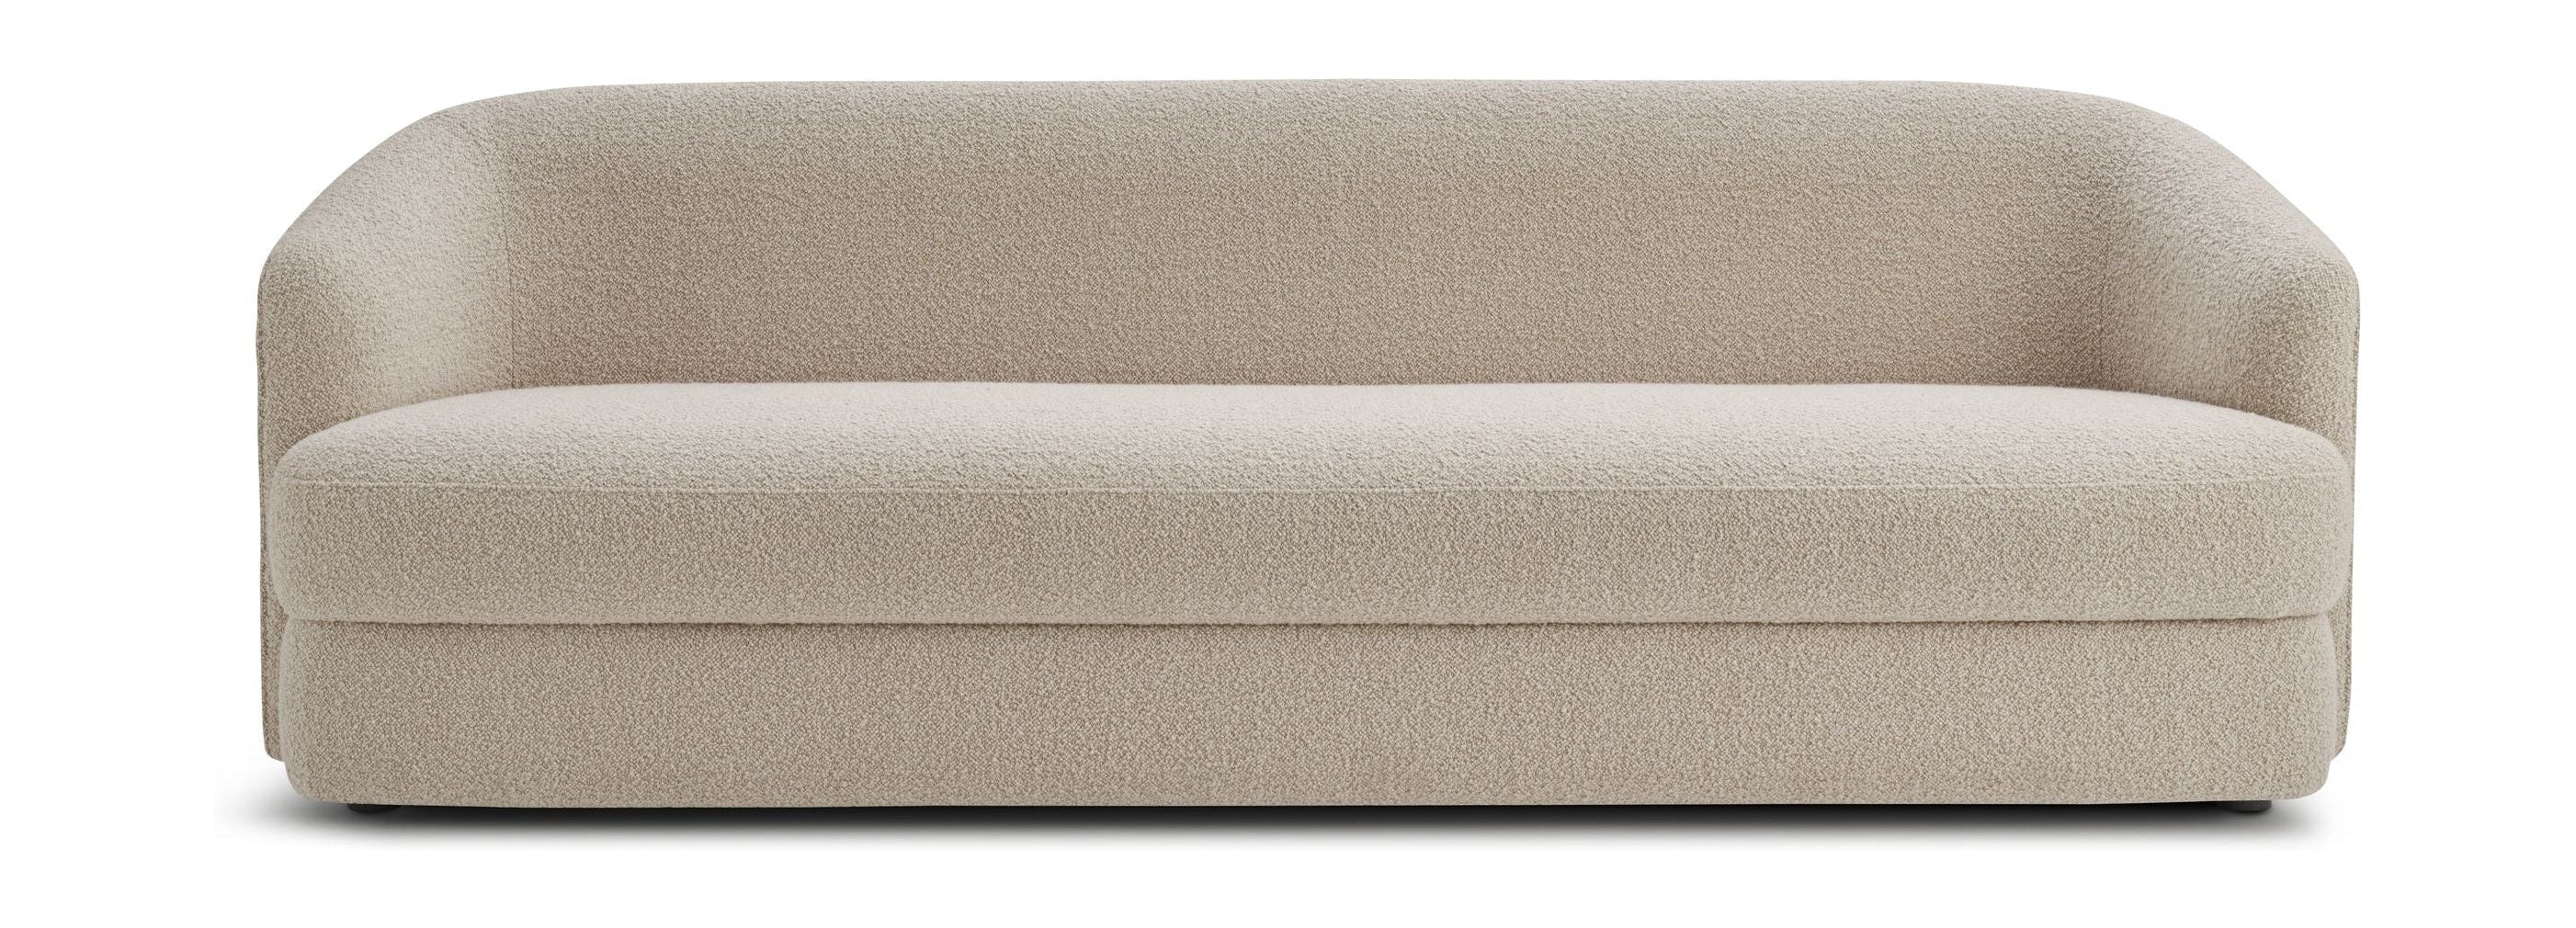 New Works Covent soffa 3 -sits, sand